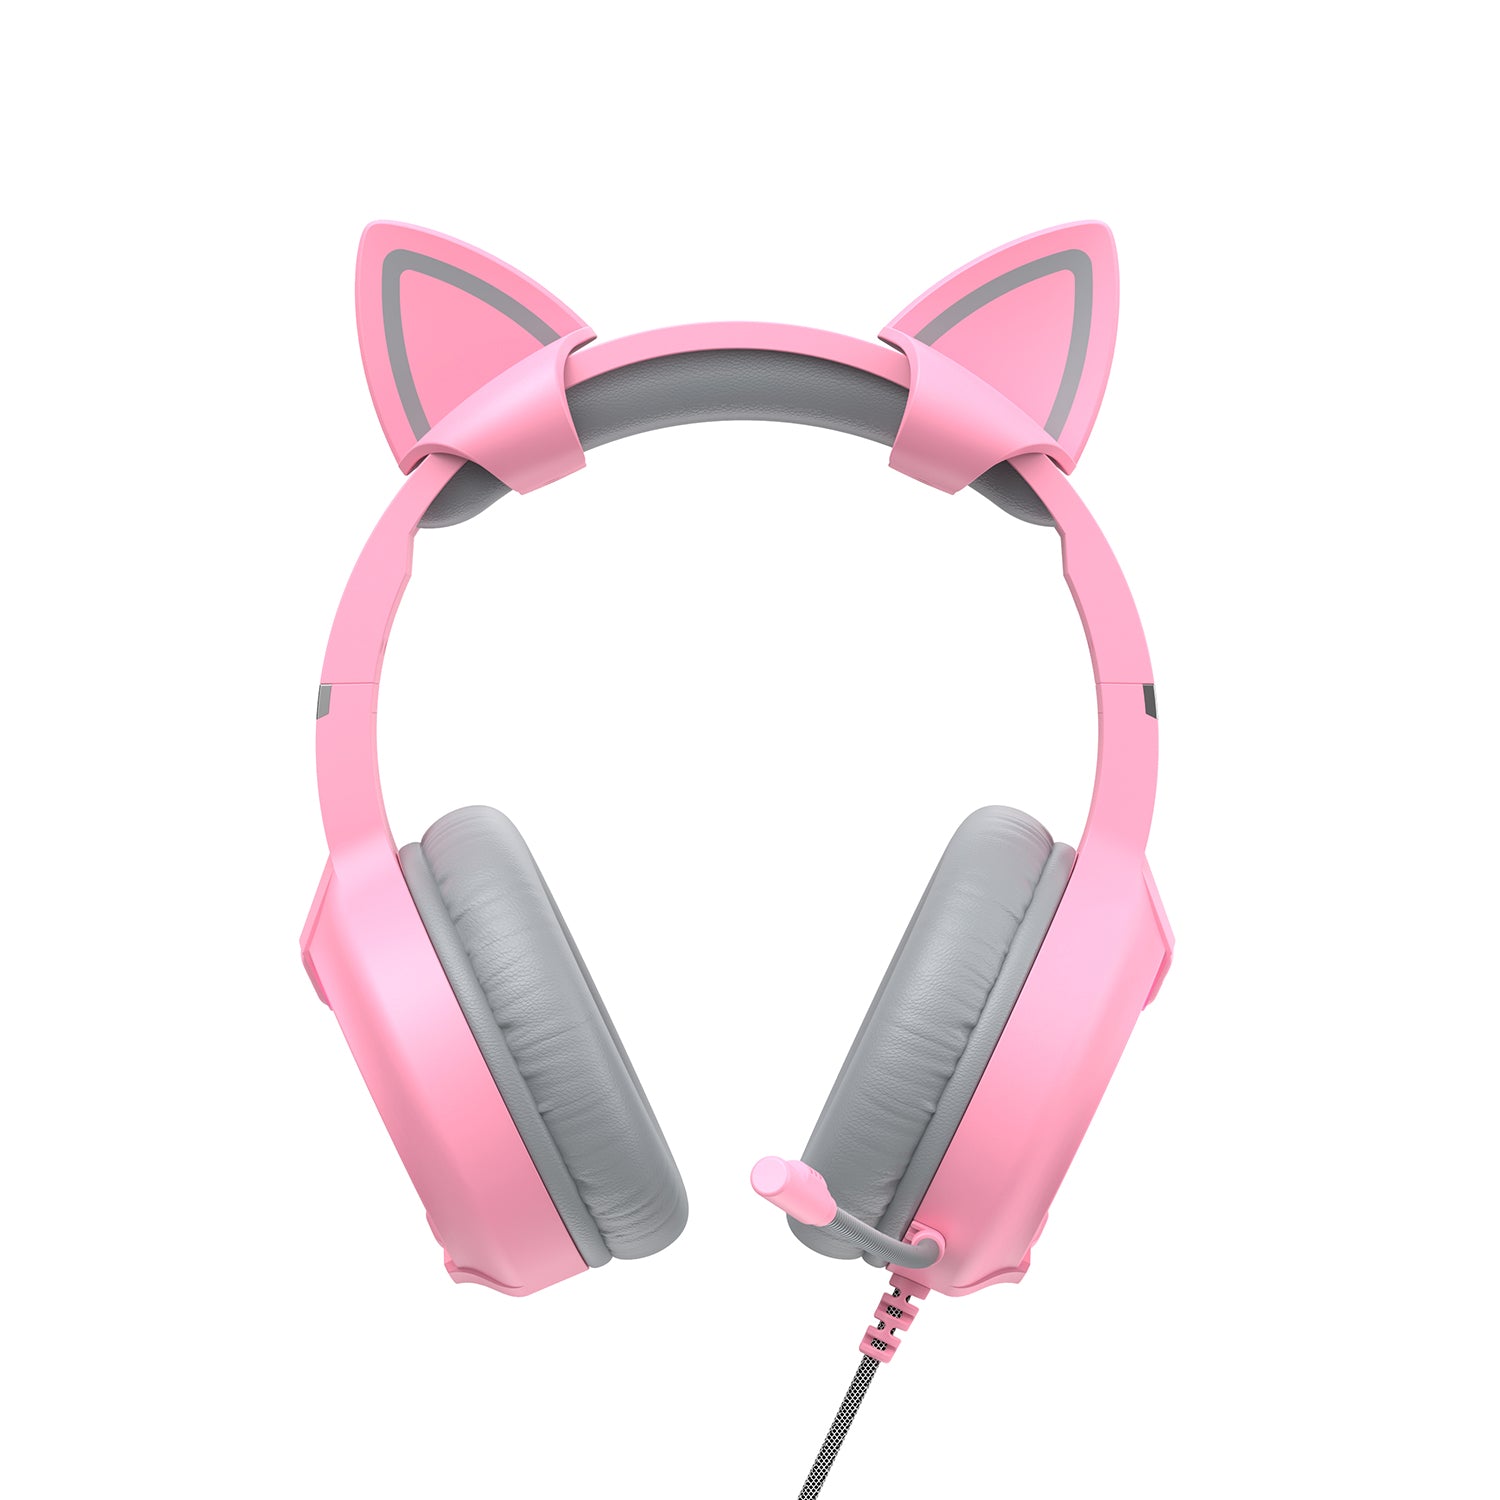 HAVIT H2233D Cat Ear RGB Gaming Headset with Volume Control & Microphone Mute Button